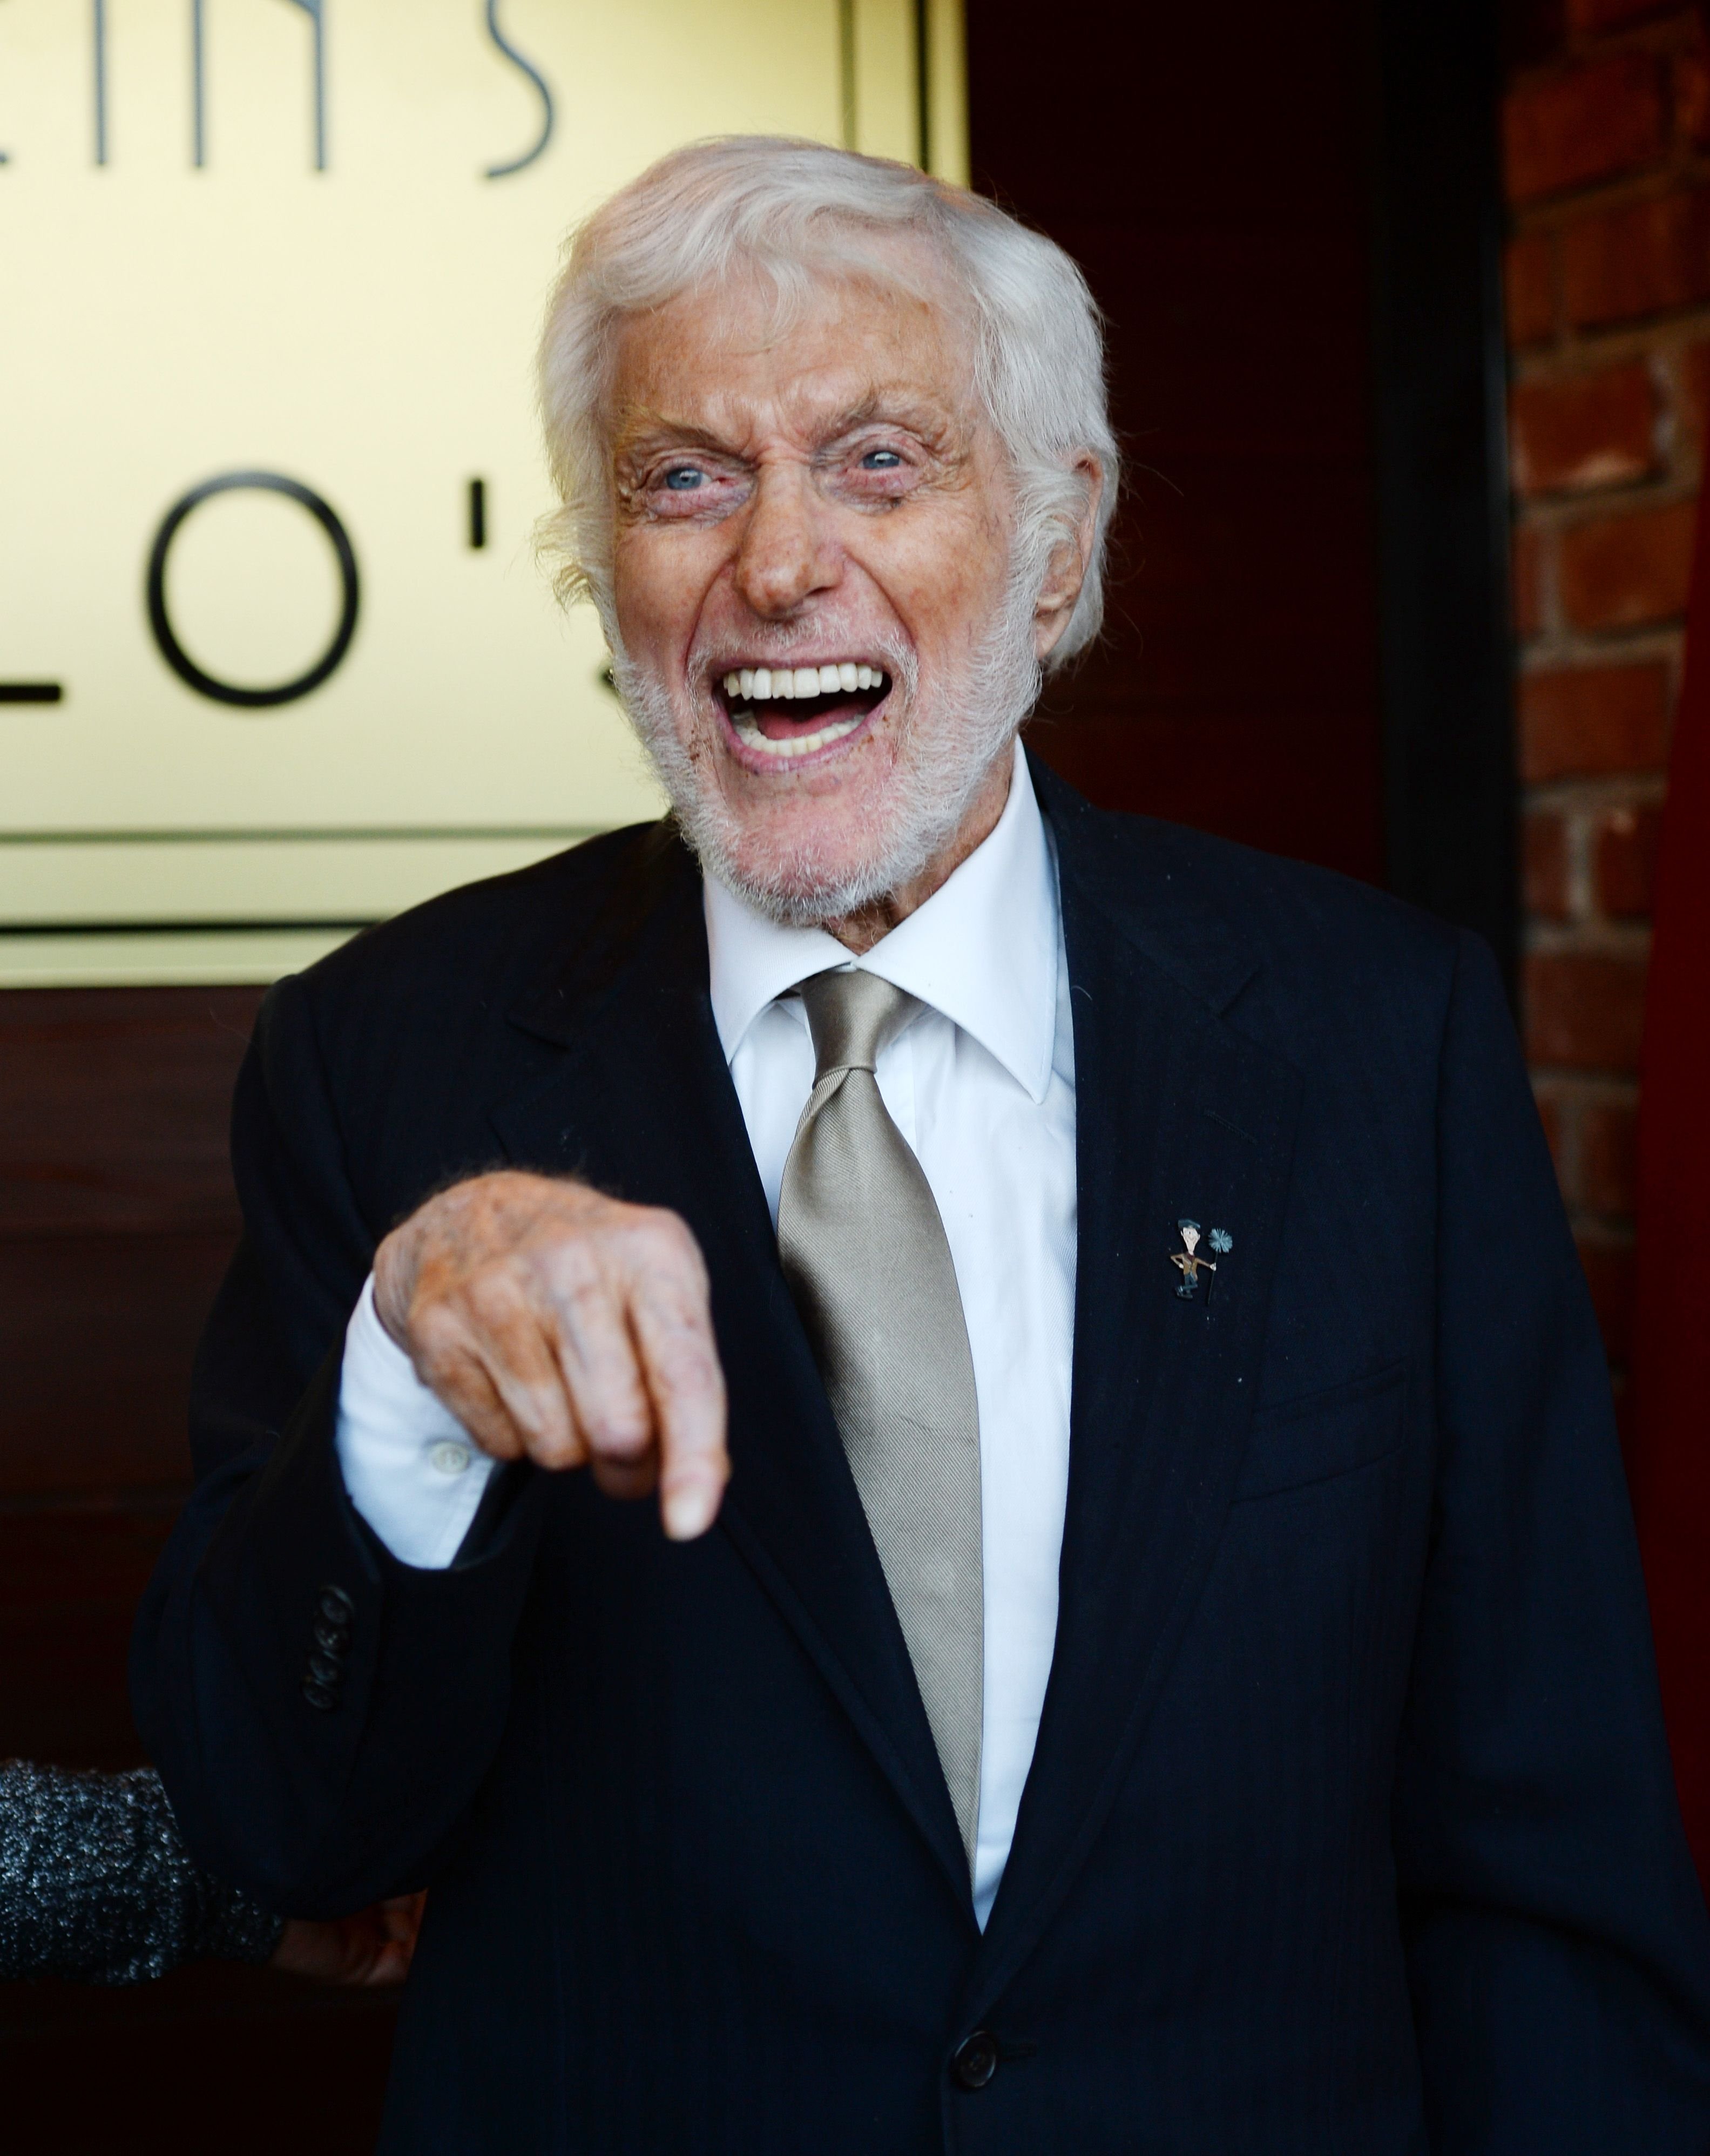 Dick Van Dyke at the debut of the Southern California location of Michael Feinstein's club on June 13, 2019, in Studio City, California. | Source: Amanda Edwards/Getty Images